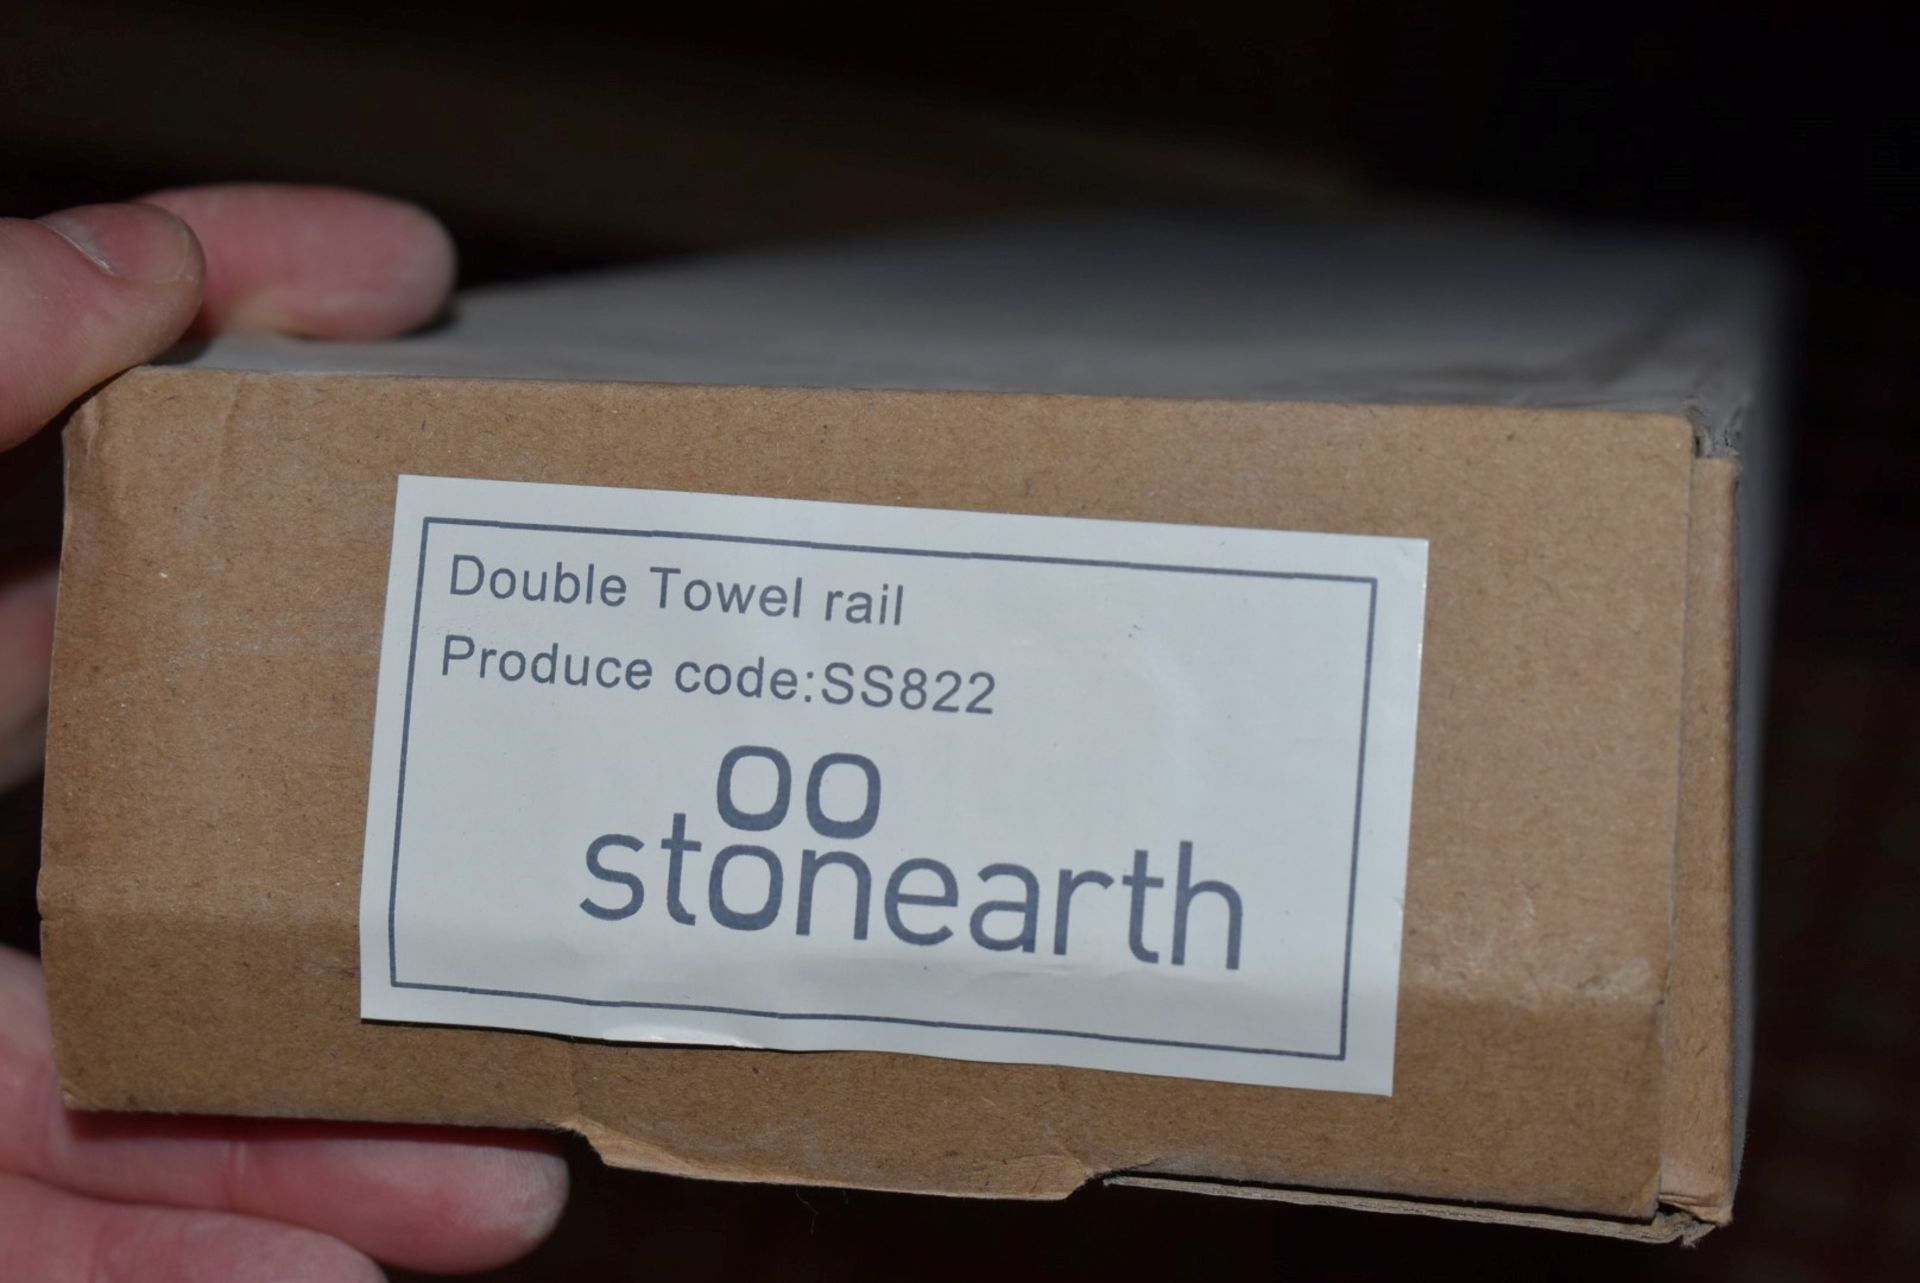 1 x Stonearth Solid Stainless Steel 4 Piece Bathroom Accessory Set - Brand New & Boxed - Image 12 of 12